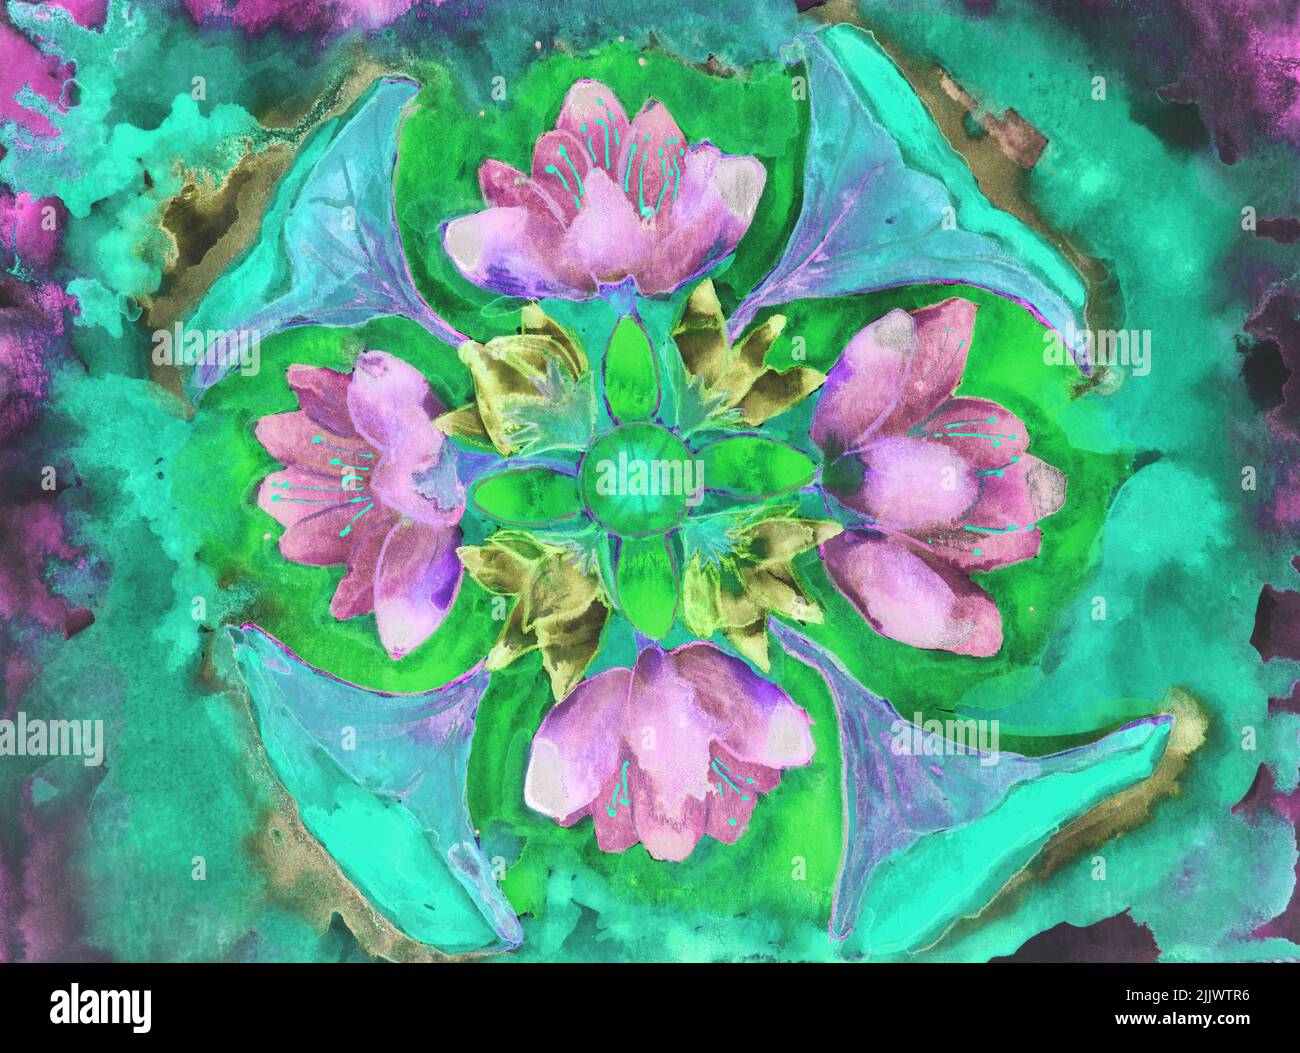 Vibrant pink lotus flowers with green background. The dabbing technique near the edges gives a soft focus effect due to the altered surface roughness Stock Photo